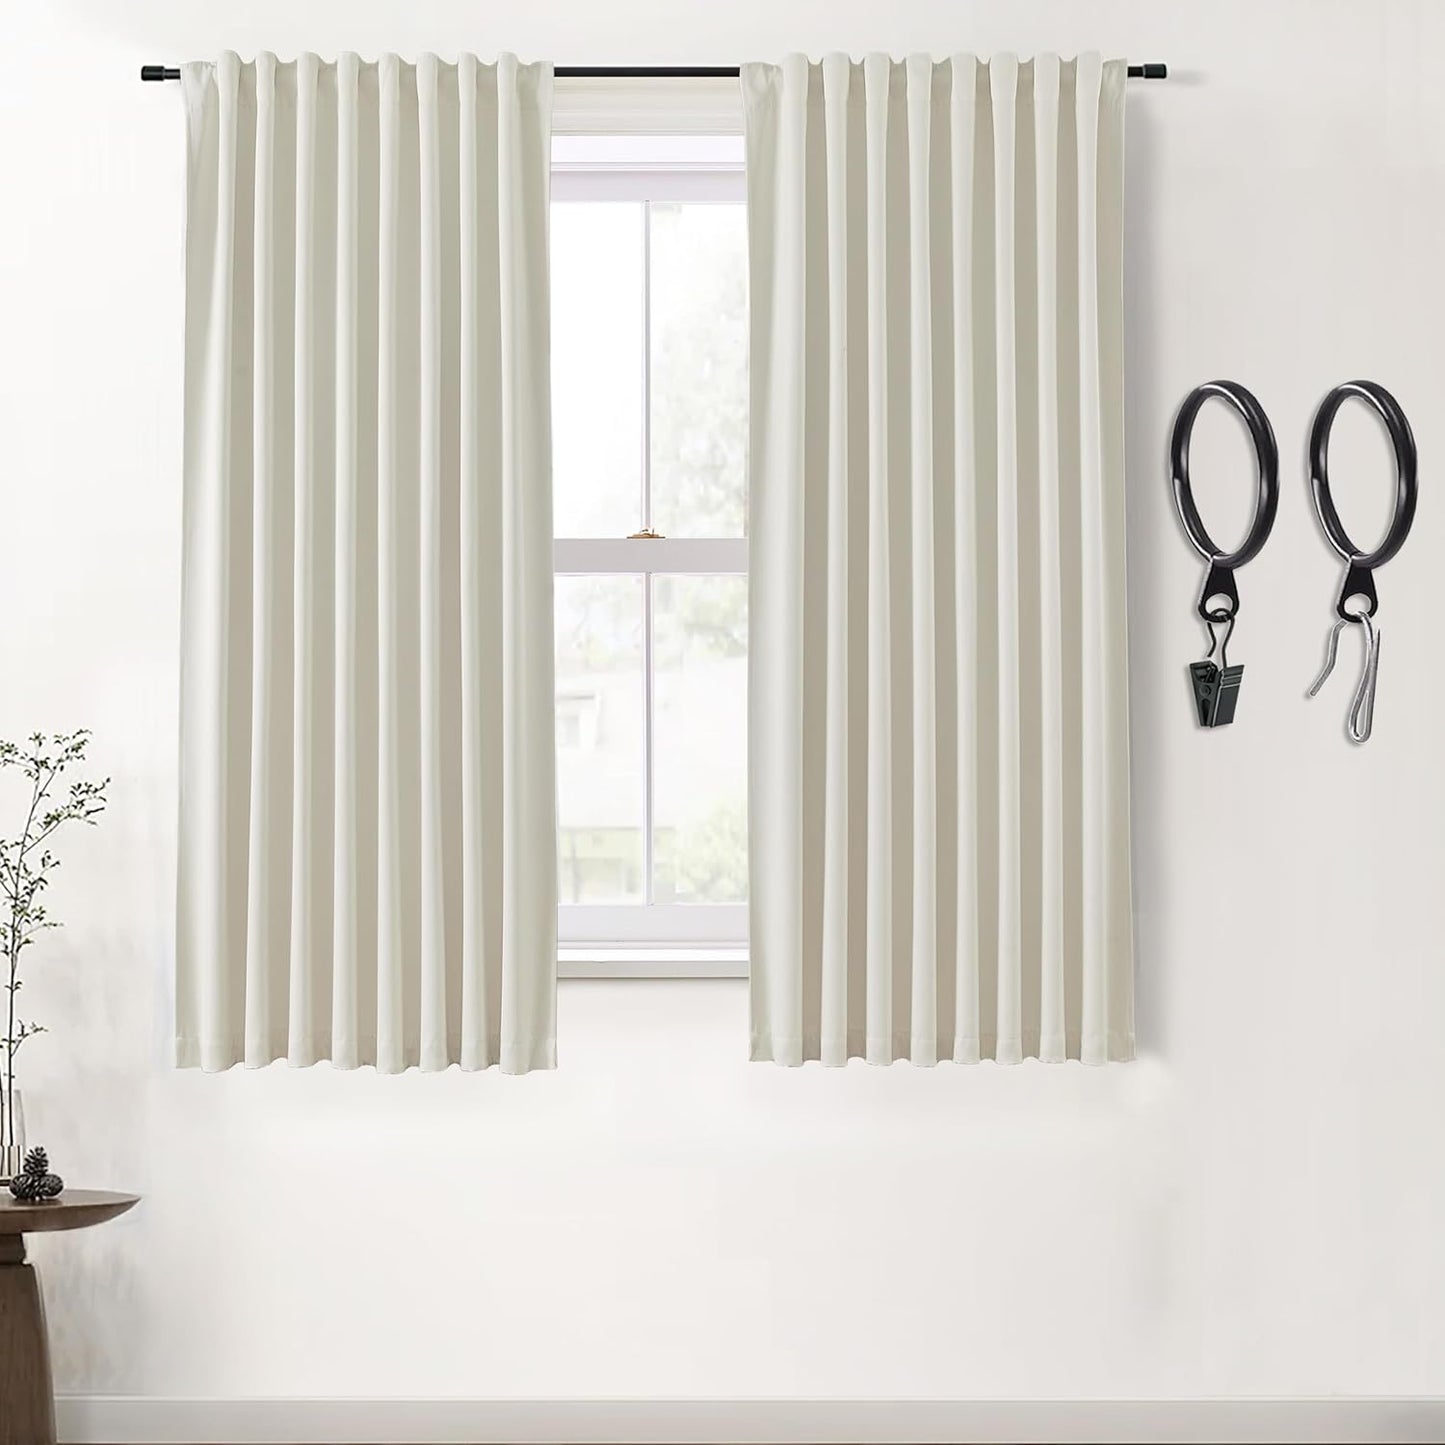 SHINELAND Beige Room Darkening Curtains 105 Inches Long for Living Room Bedroom,Cortinas Para Cuarto Bloqueador De Luz,Thermal Insulated Back Tab Pleat Blackout Curtains for Sunroom Patio Door Indoor  SHINELAND Cream 2X(52"Wx63"L) 